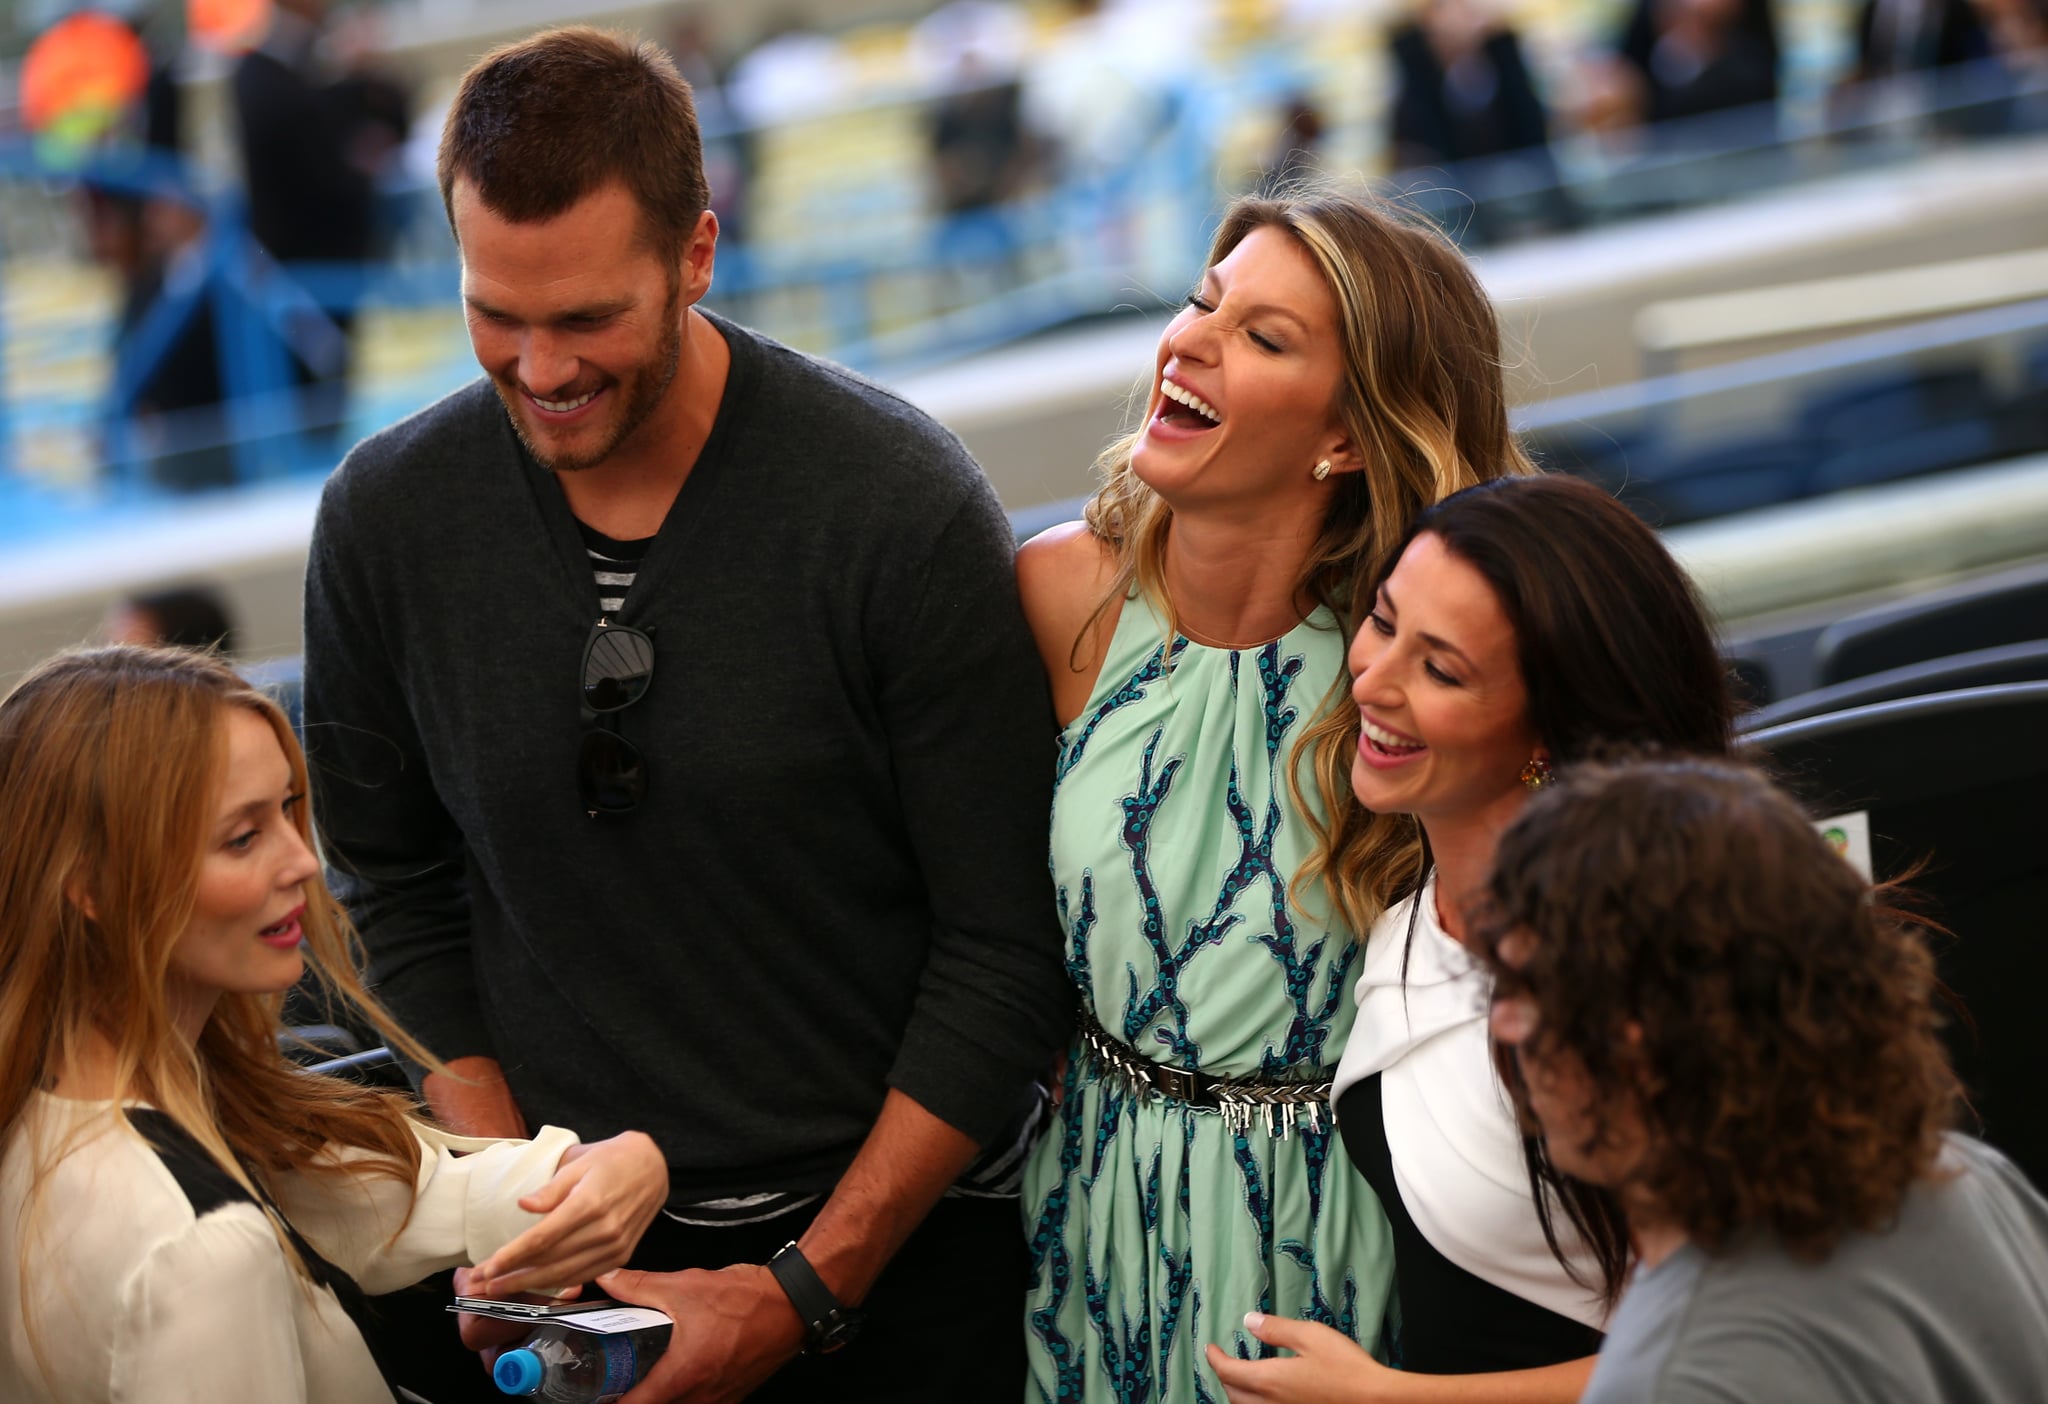 Tom Brady And Gisele Bündchen Laughed With Friends At The Game The